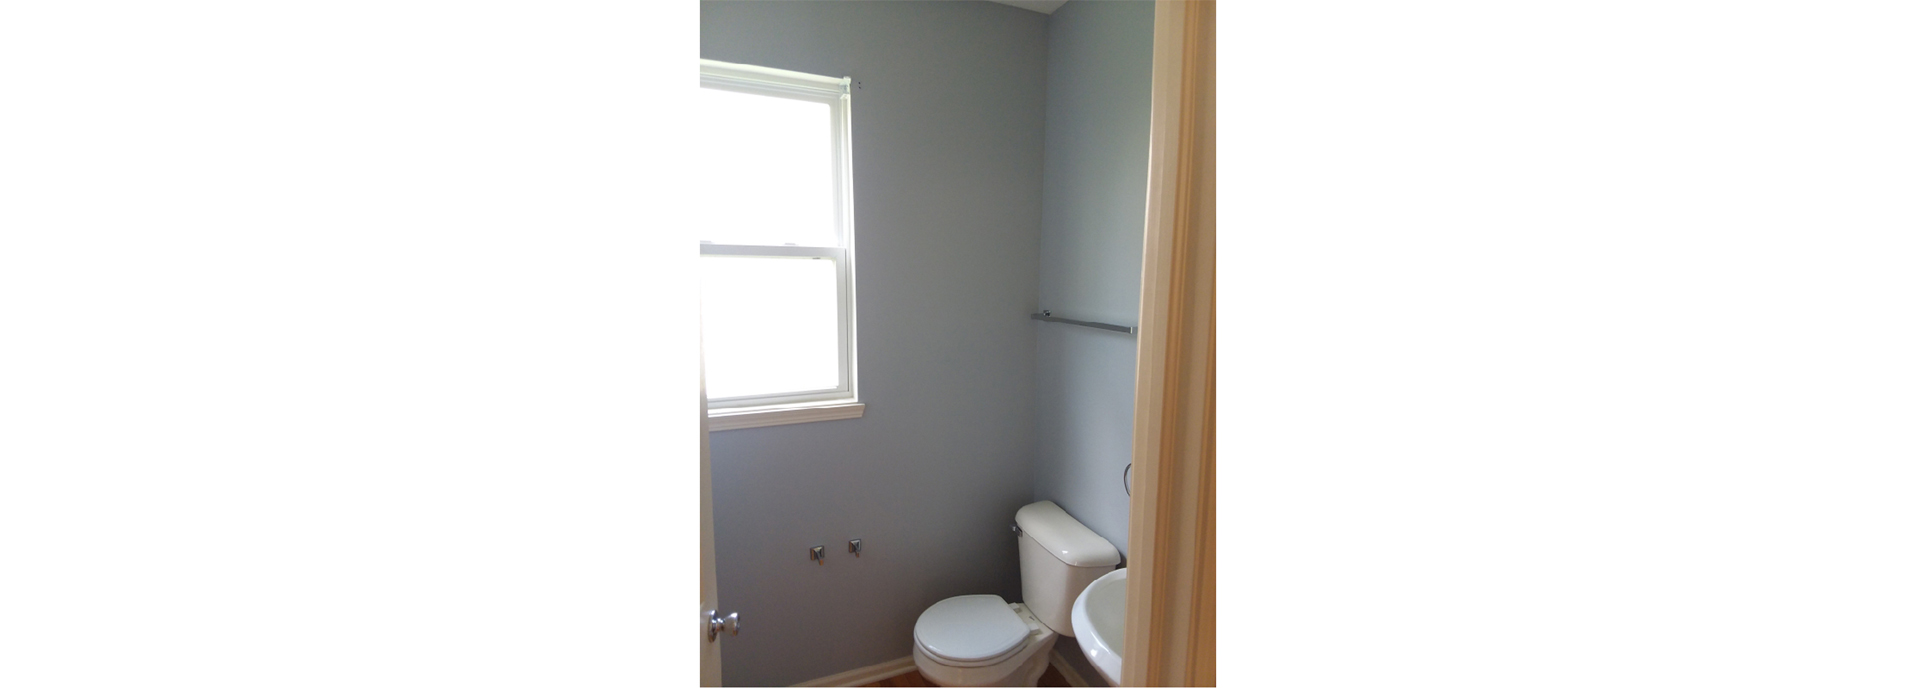 broadview heights residential bathroom before and after - after